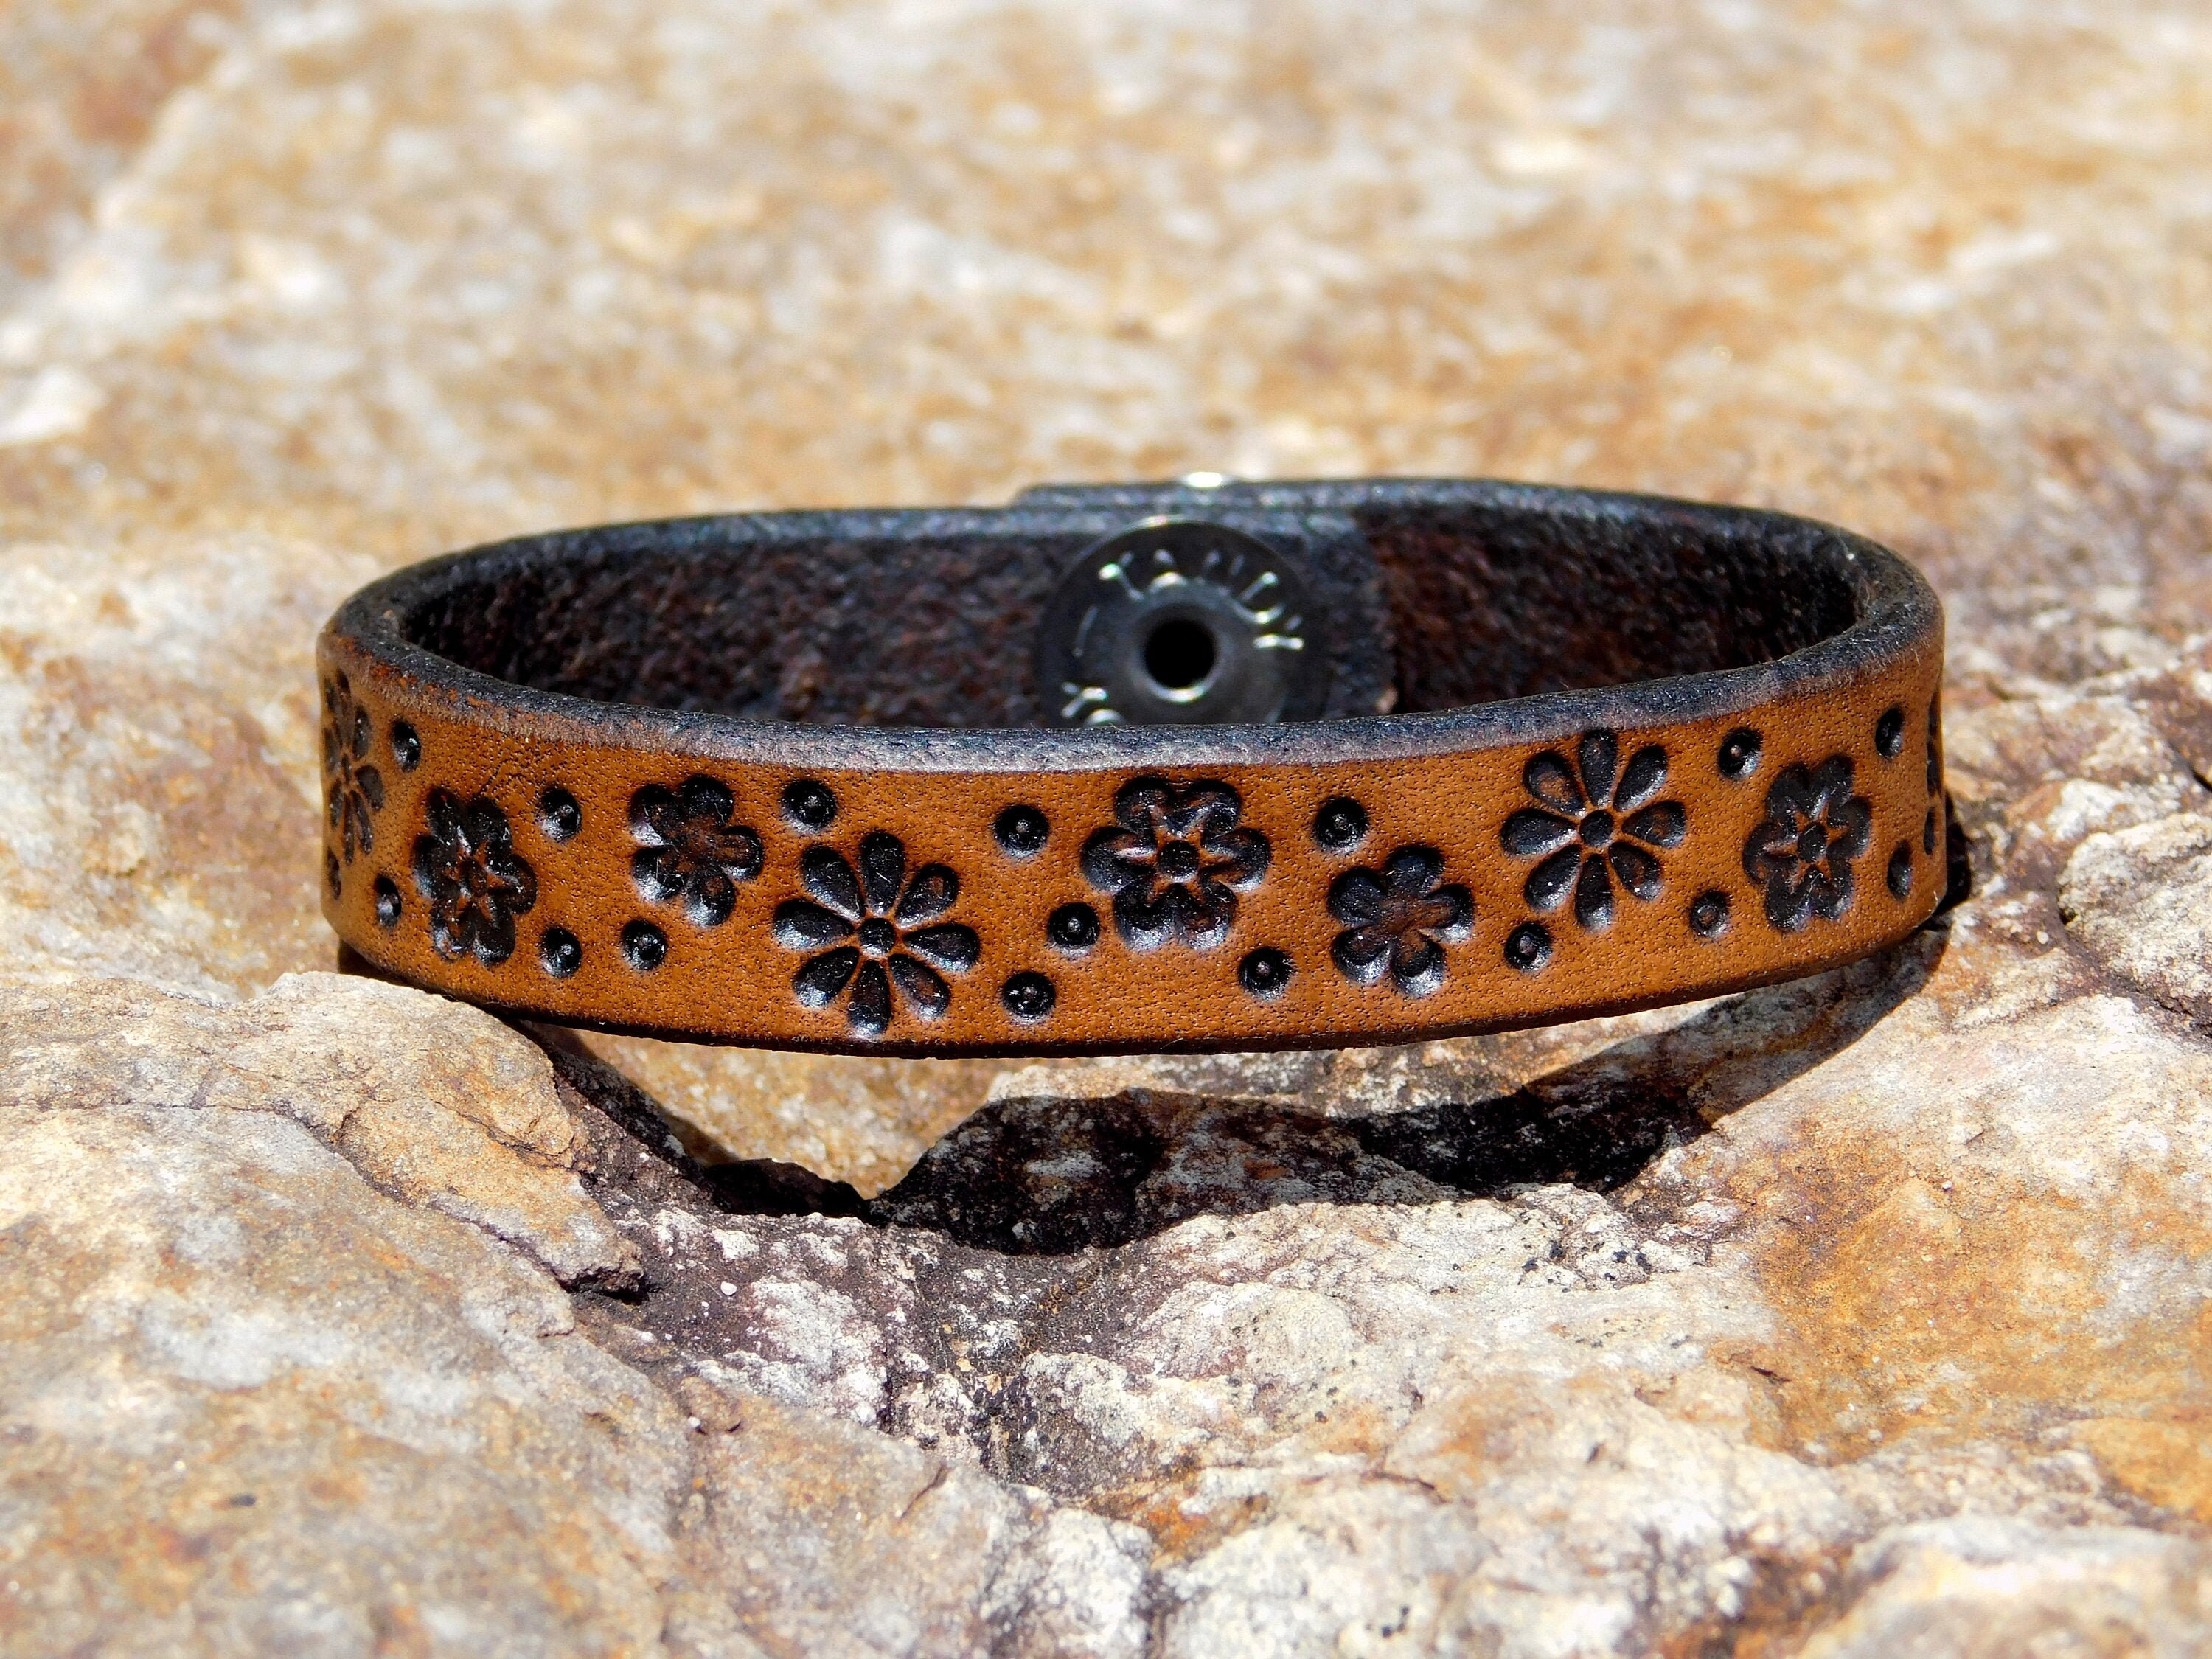 Great Wrapped Leather and Beads Bracelet Tutorials / The Beading Gem